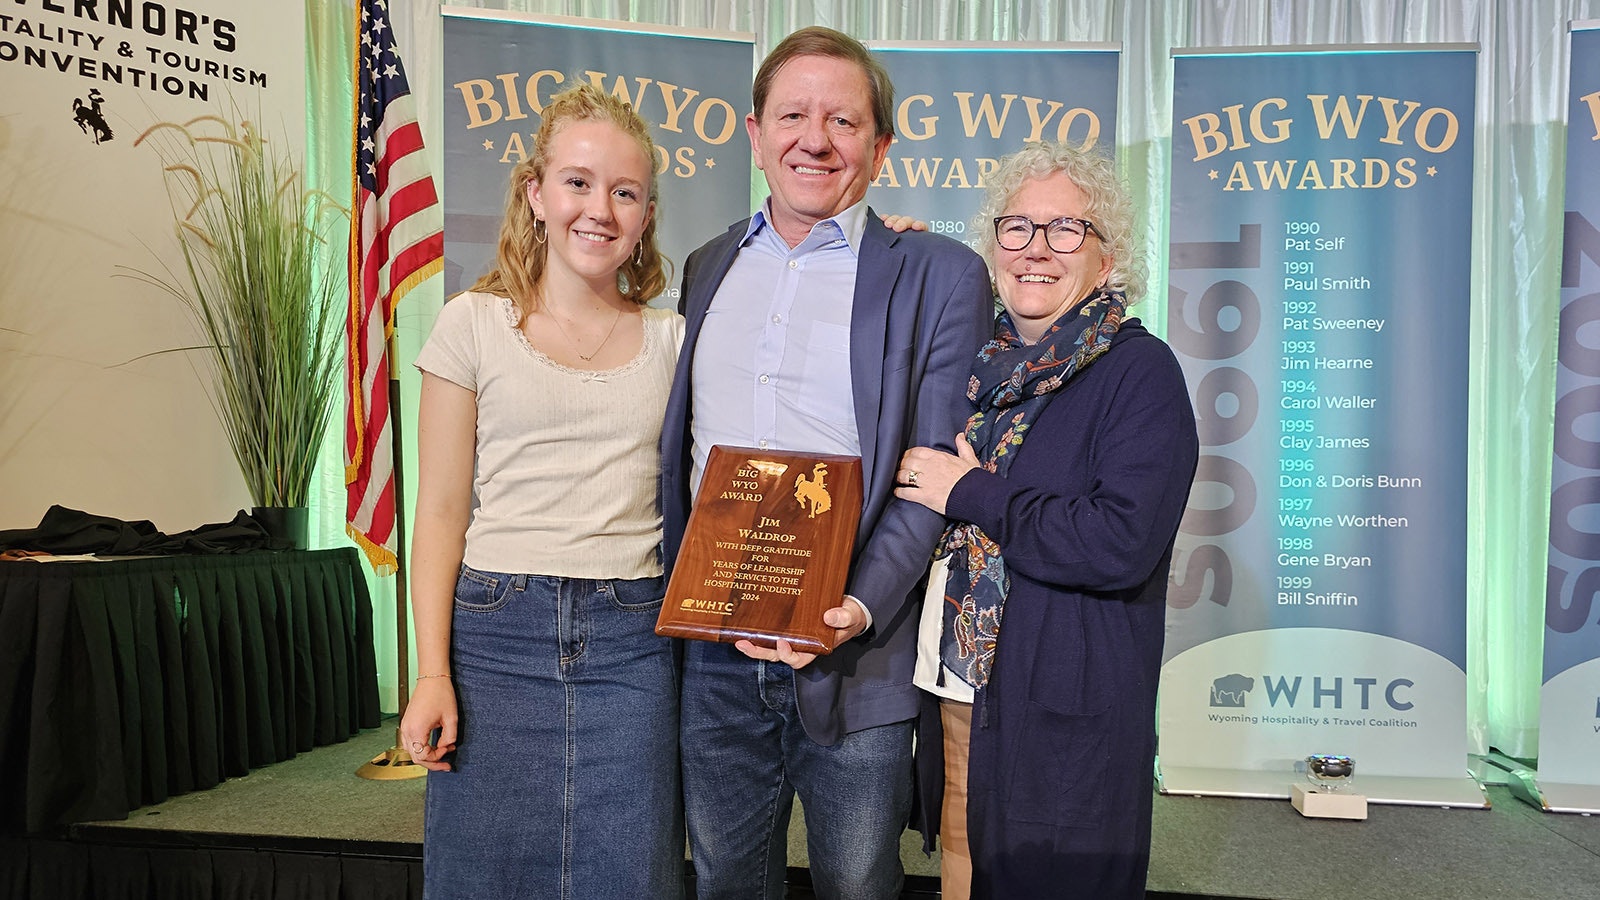 Jim Waldrop displays his BIG WYO Award with his wife, Charlotte, and daughter, Lucy.